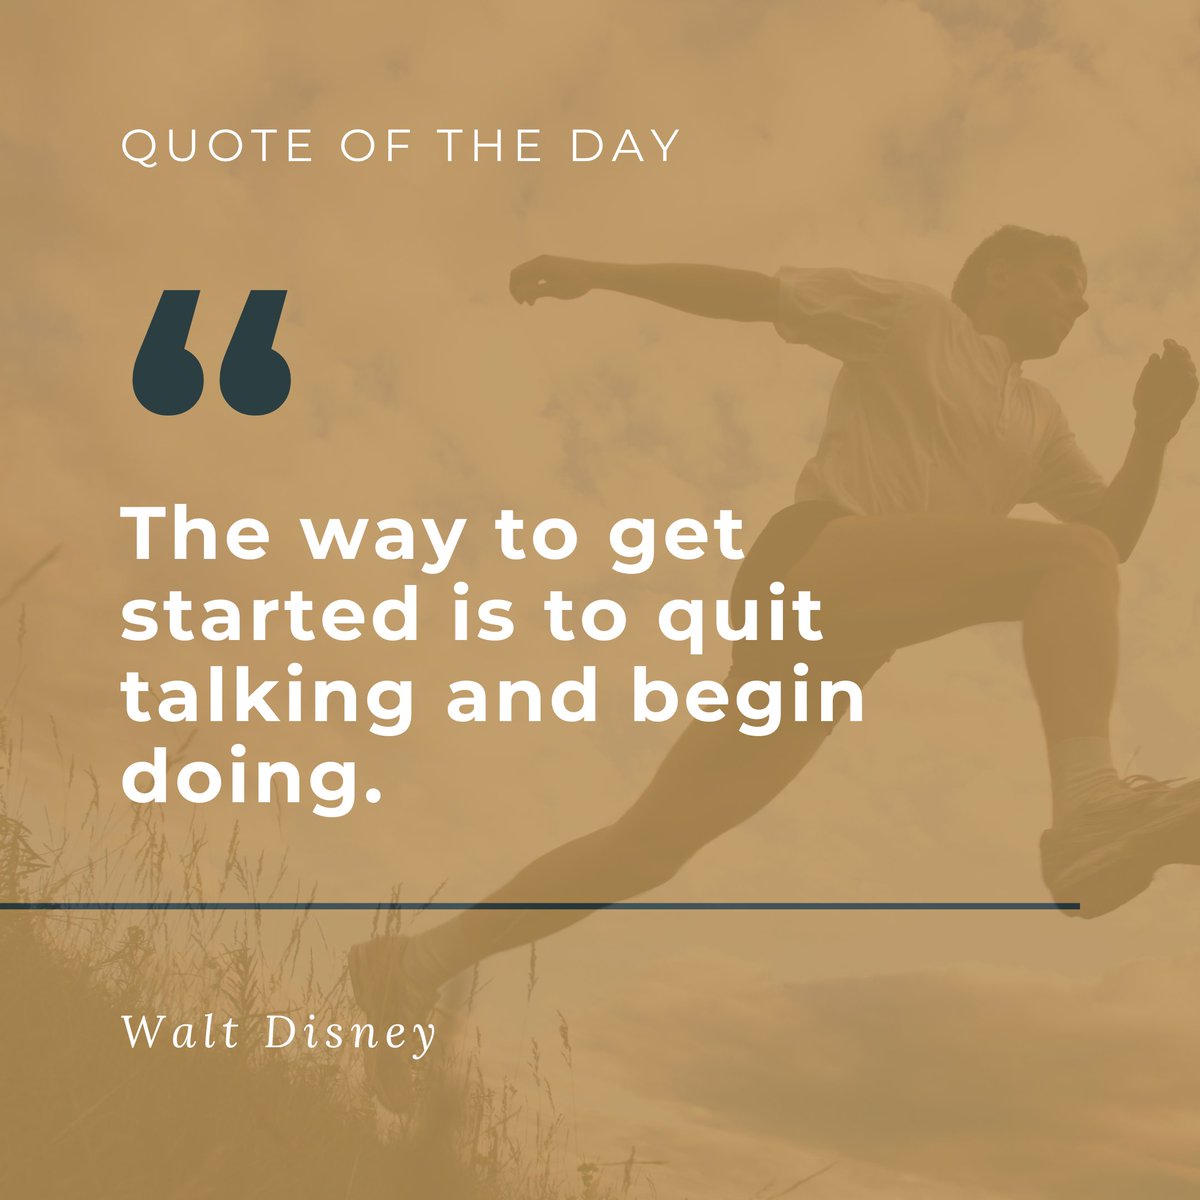 'The way to get started is to quit talking and begin doing.' – Walt Disney 💡 

Whether it's switching jobs, starting a business, or mastering your finances, take that leap today.
-
-
-
#BuildingEconomicSecurity #TakeAction #WaltDisneyQuote #StartDoing #MakeItHappen